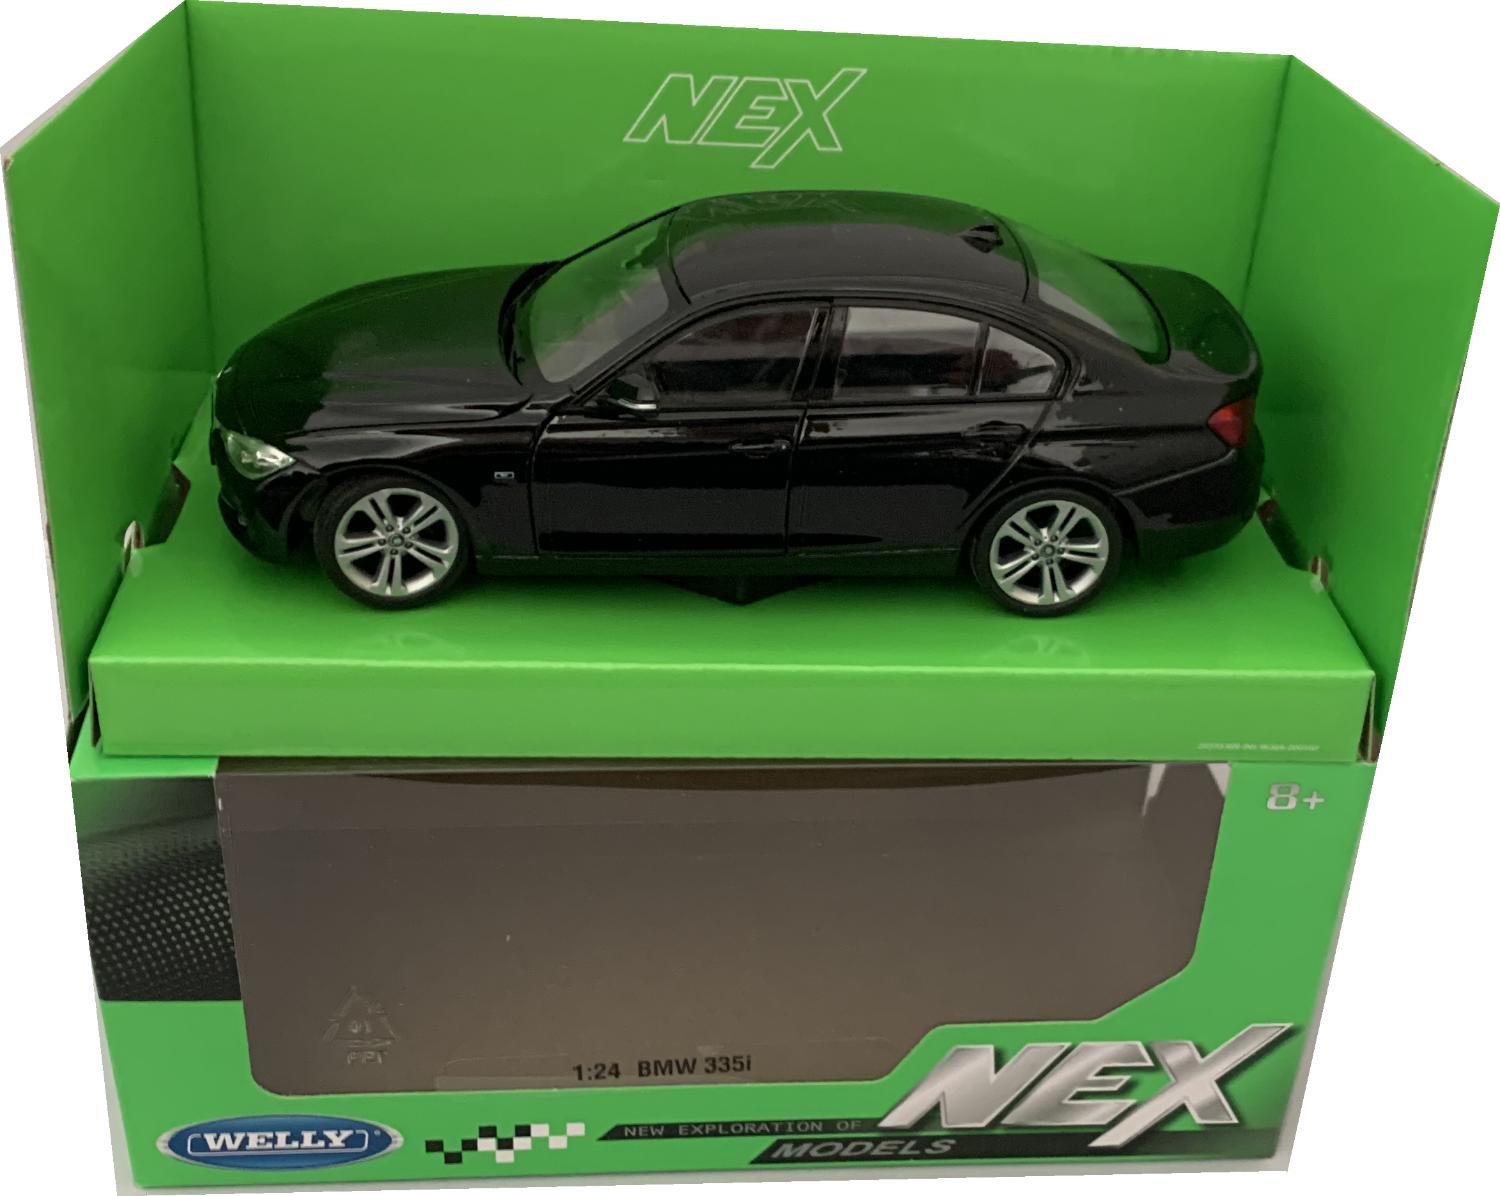 The model is  presented in a window display box, the car is approx. 19 cm long and the presentation box is 23 cm long. Opening driver and passenger doors, opening bonnet,